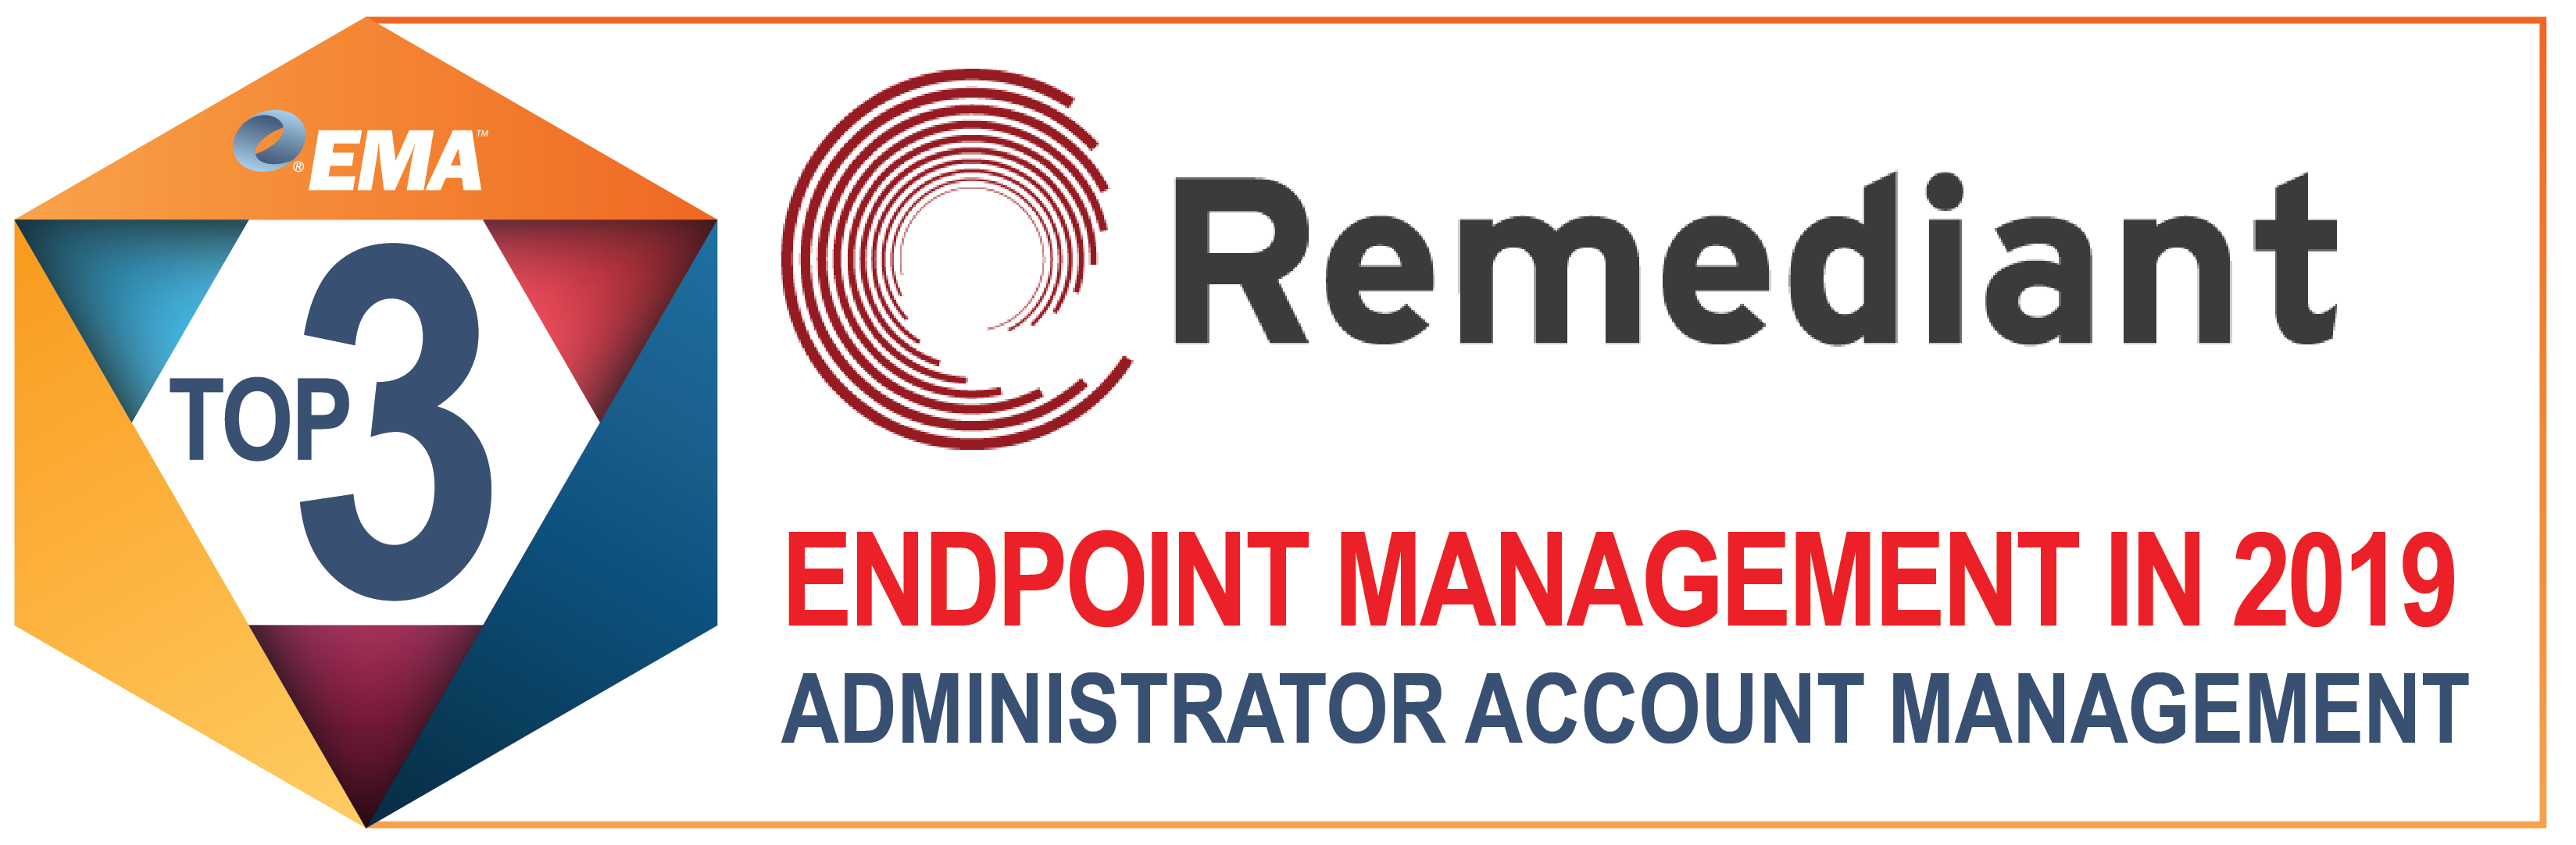 EMA Top 3 for Endpoint Management in 2019